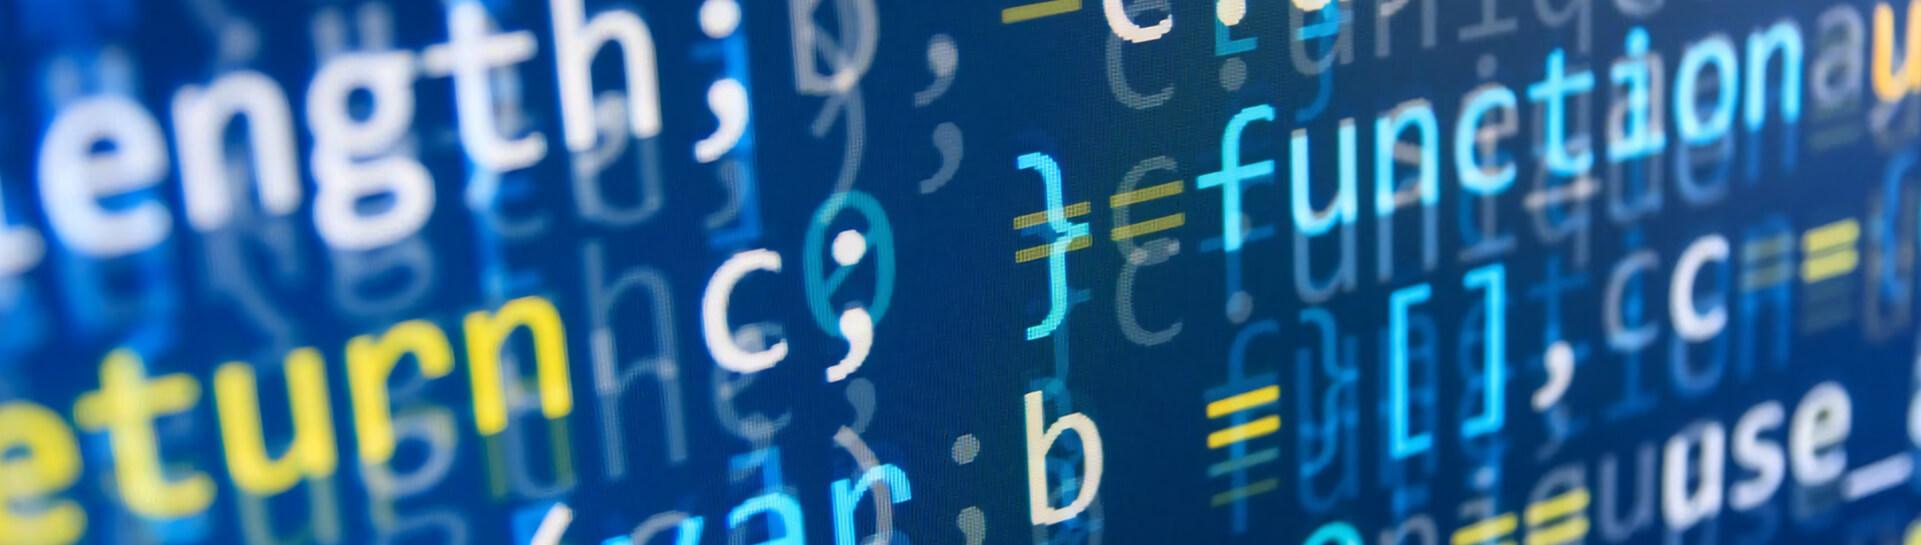 A close-up of code on a computer screen representing cryptography techniques taught by the Tulane School of Professional Advancement in New Orleans, LA